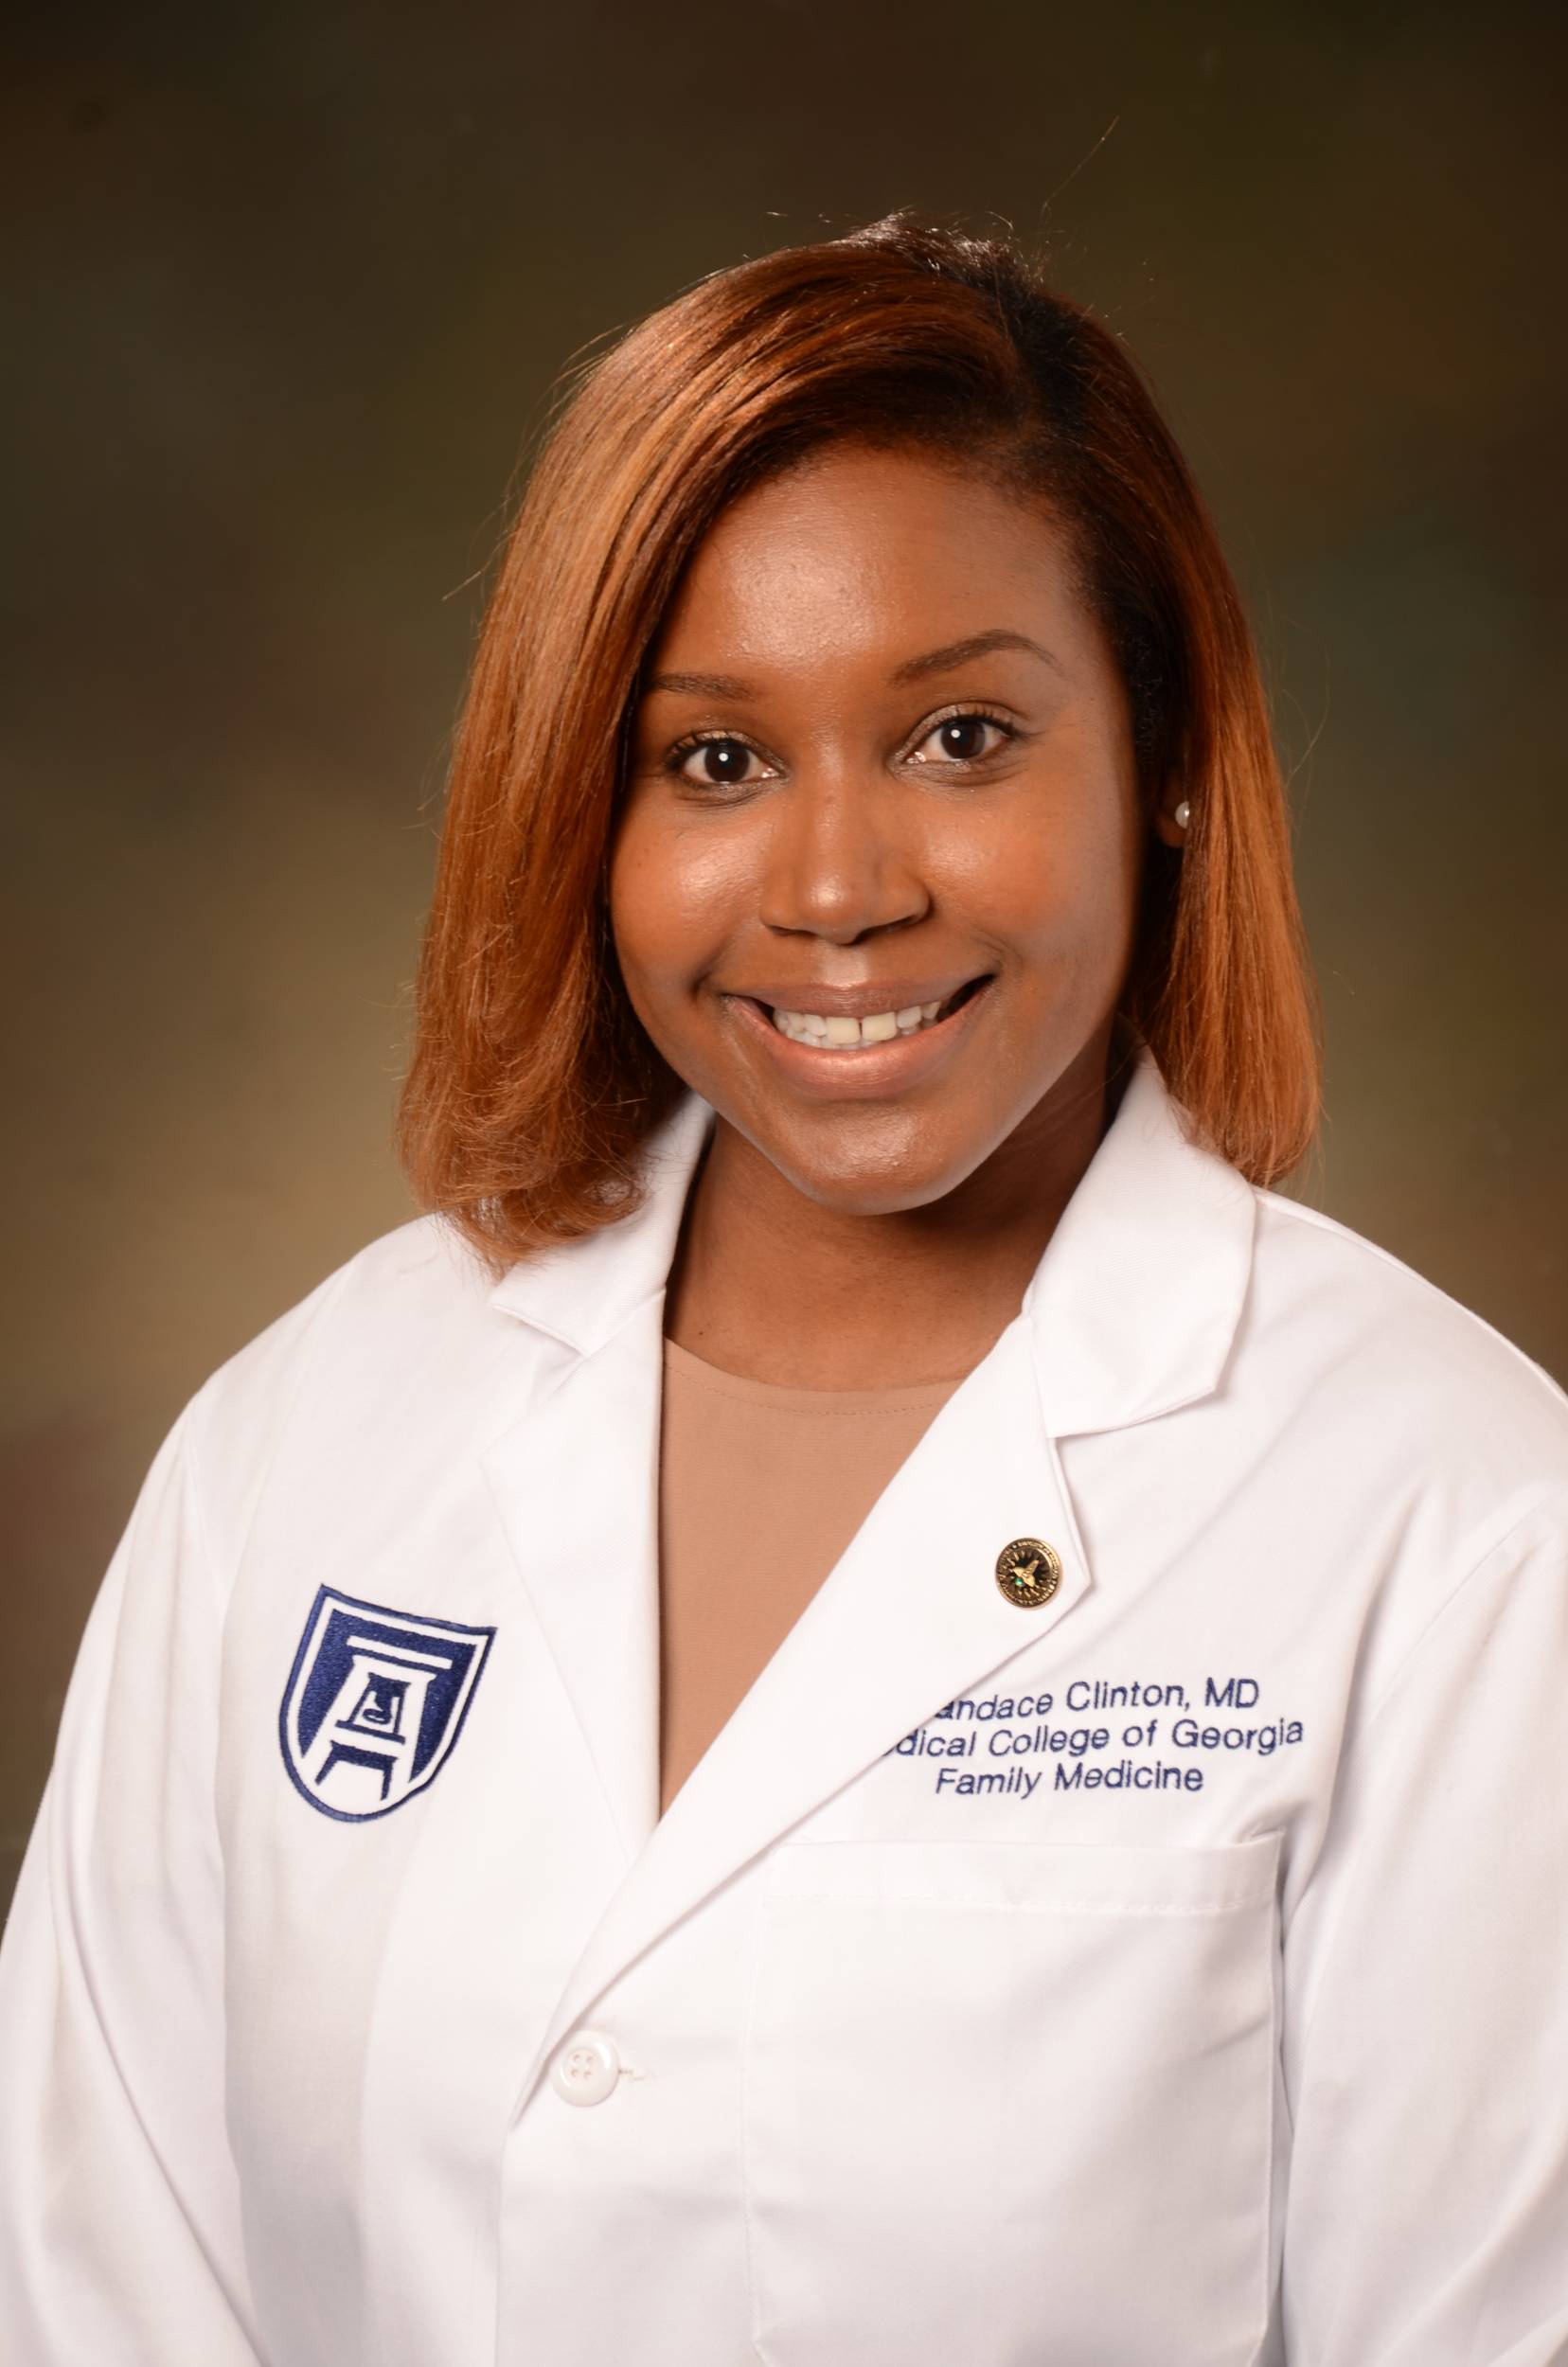 photo of Candace Clinton, MD